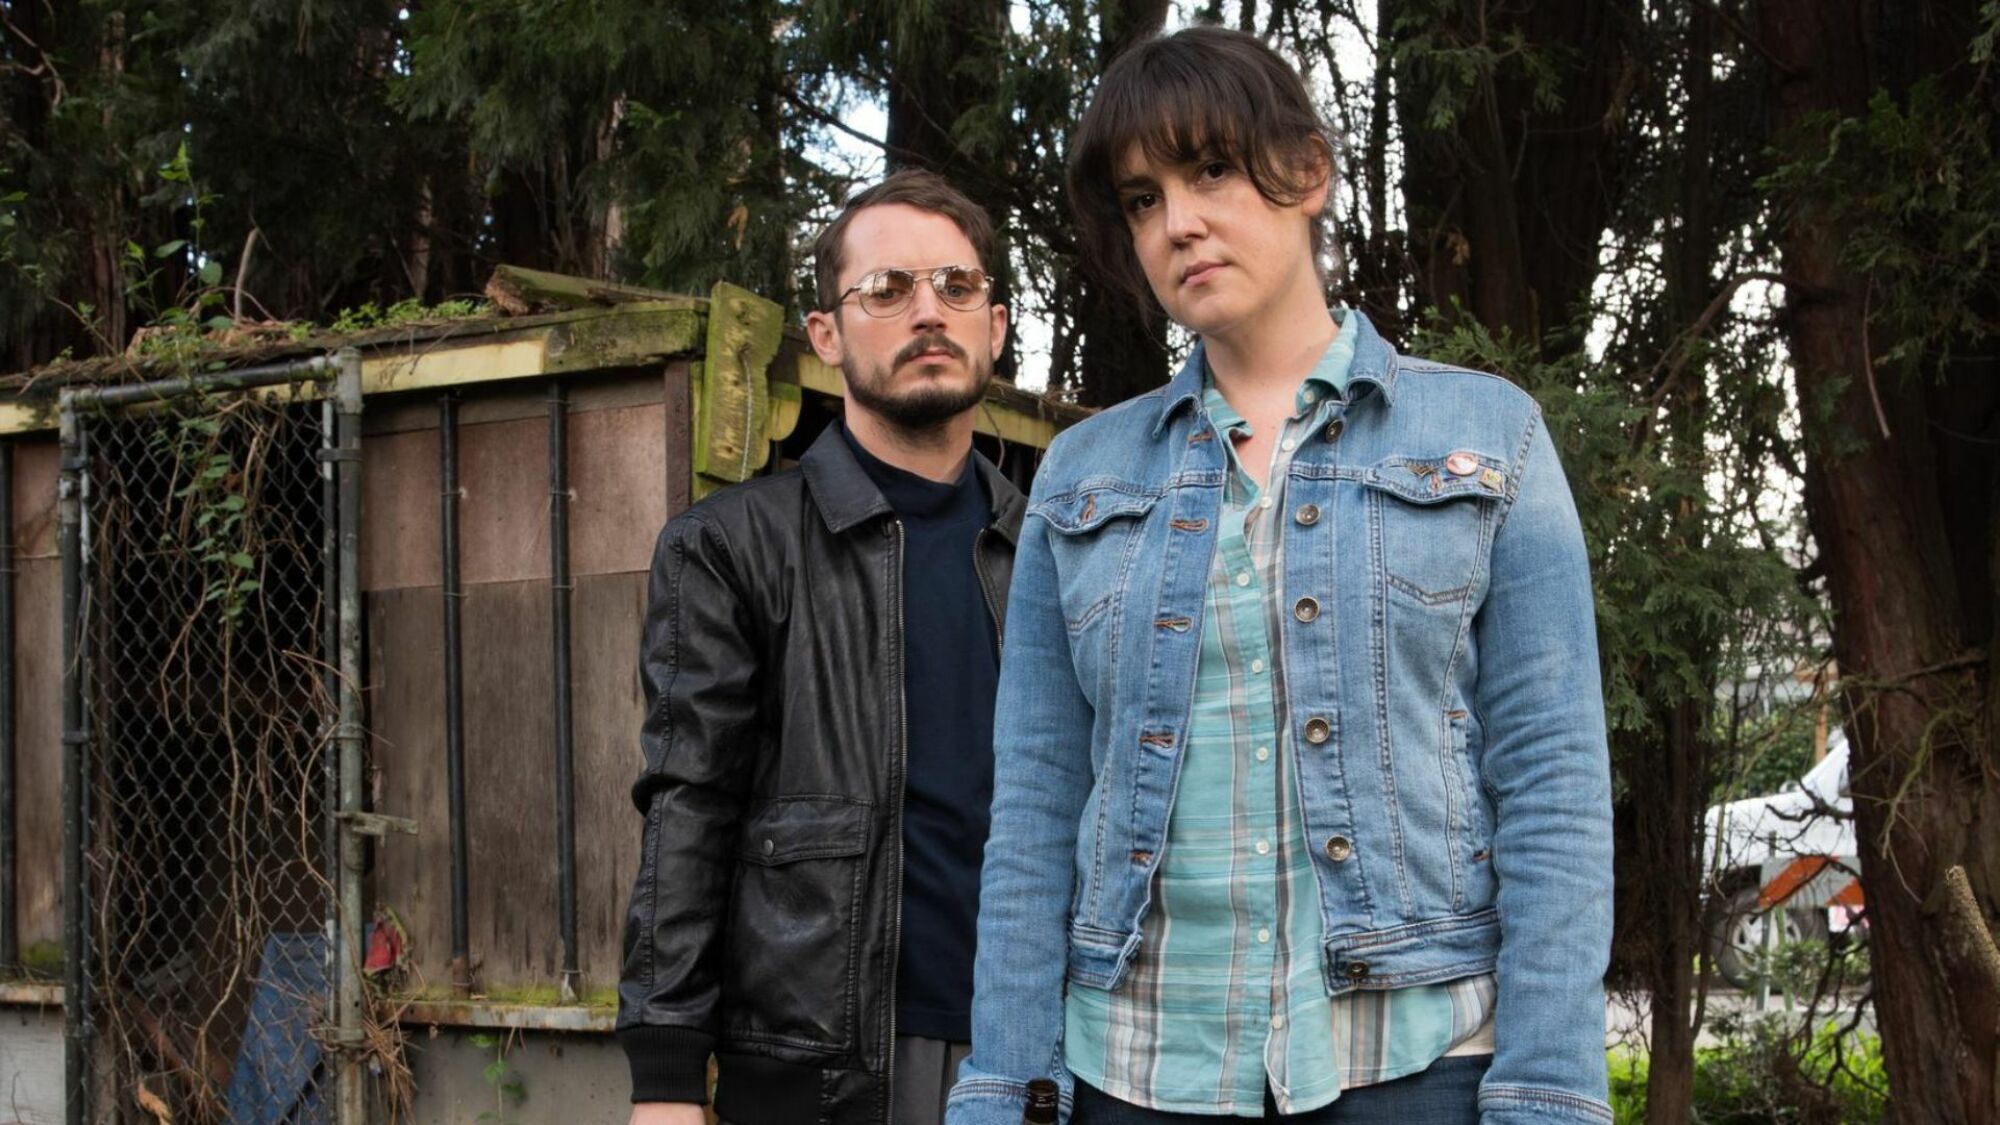 Elijah Wood and Melanie Lynskey in "I Don’t Feel at Home in This World Anymore."